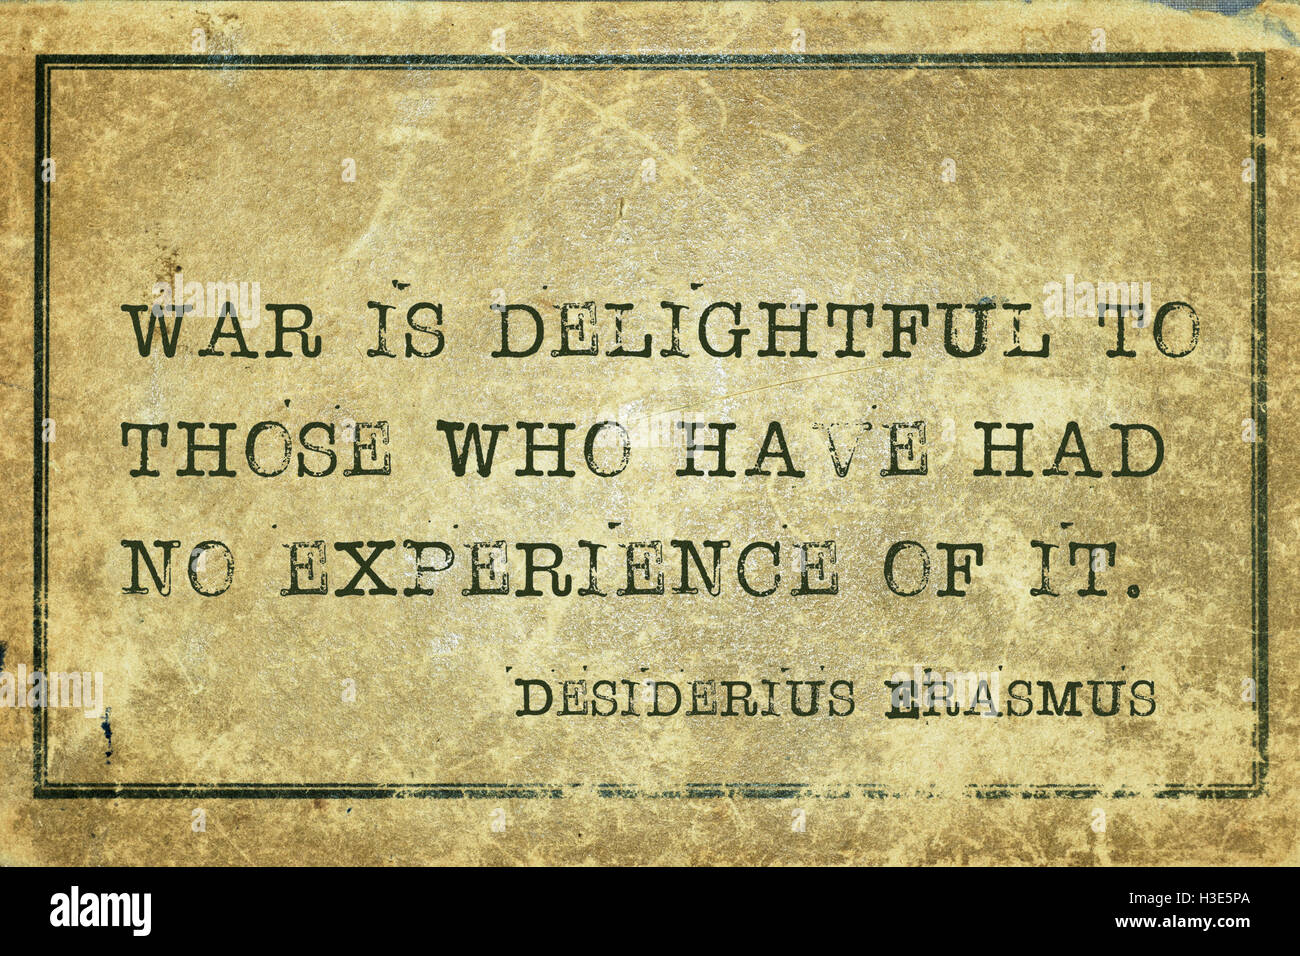 War is delightful to those who have had no experience - ancient Dutch philosopher Desiderius Erasmus quote printed on grunge vin Stock Photo